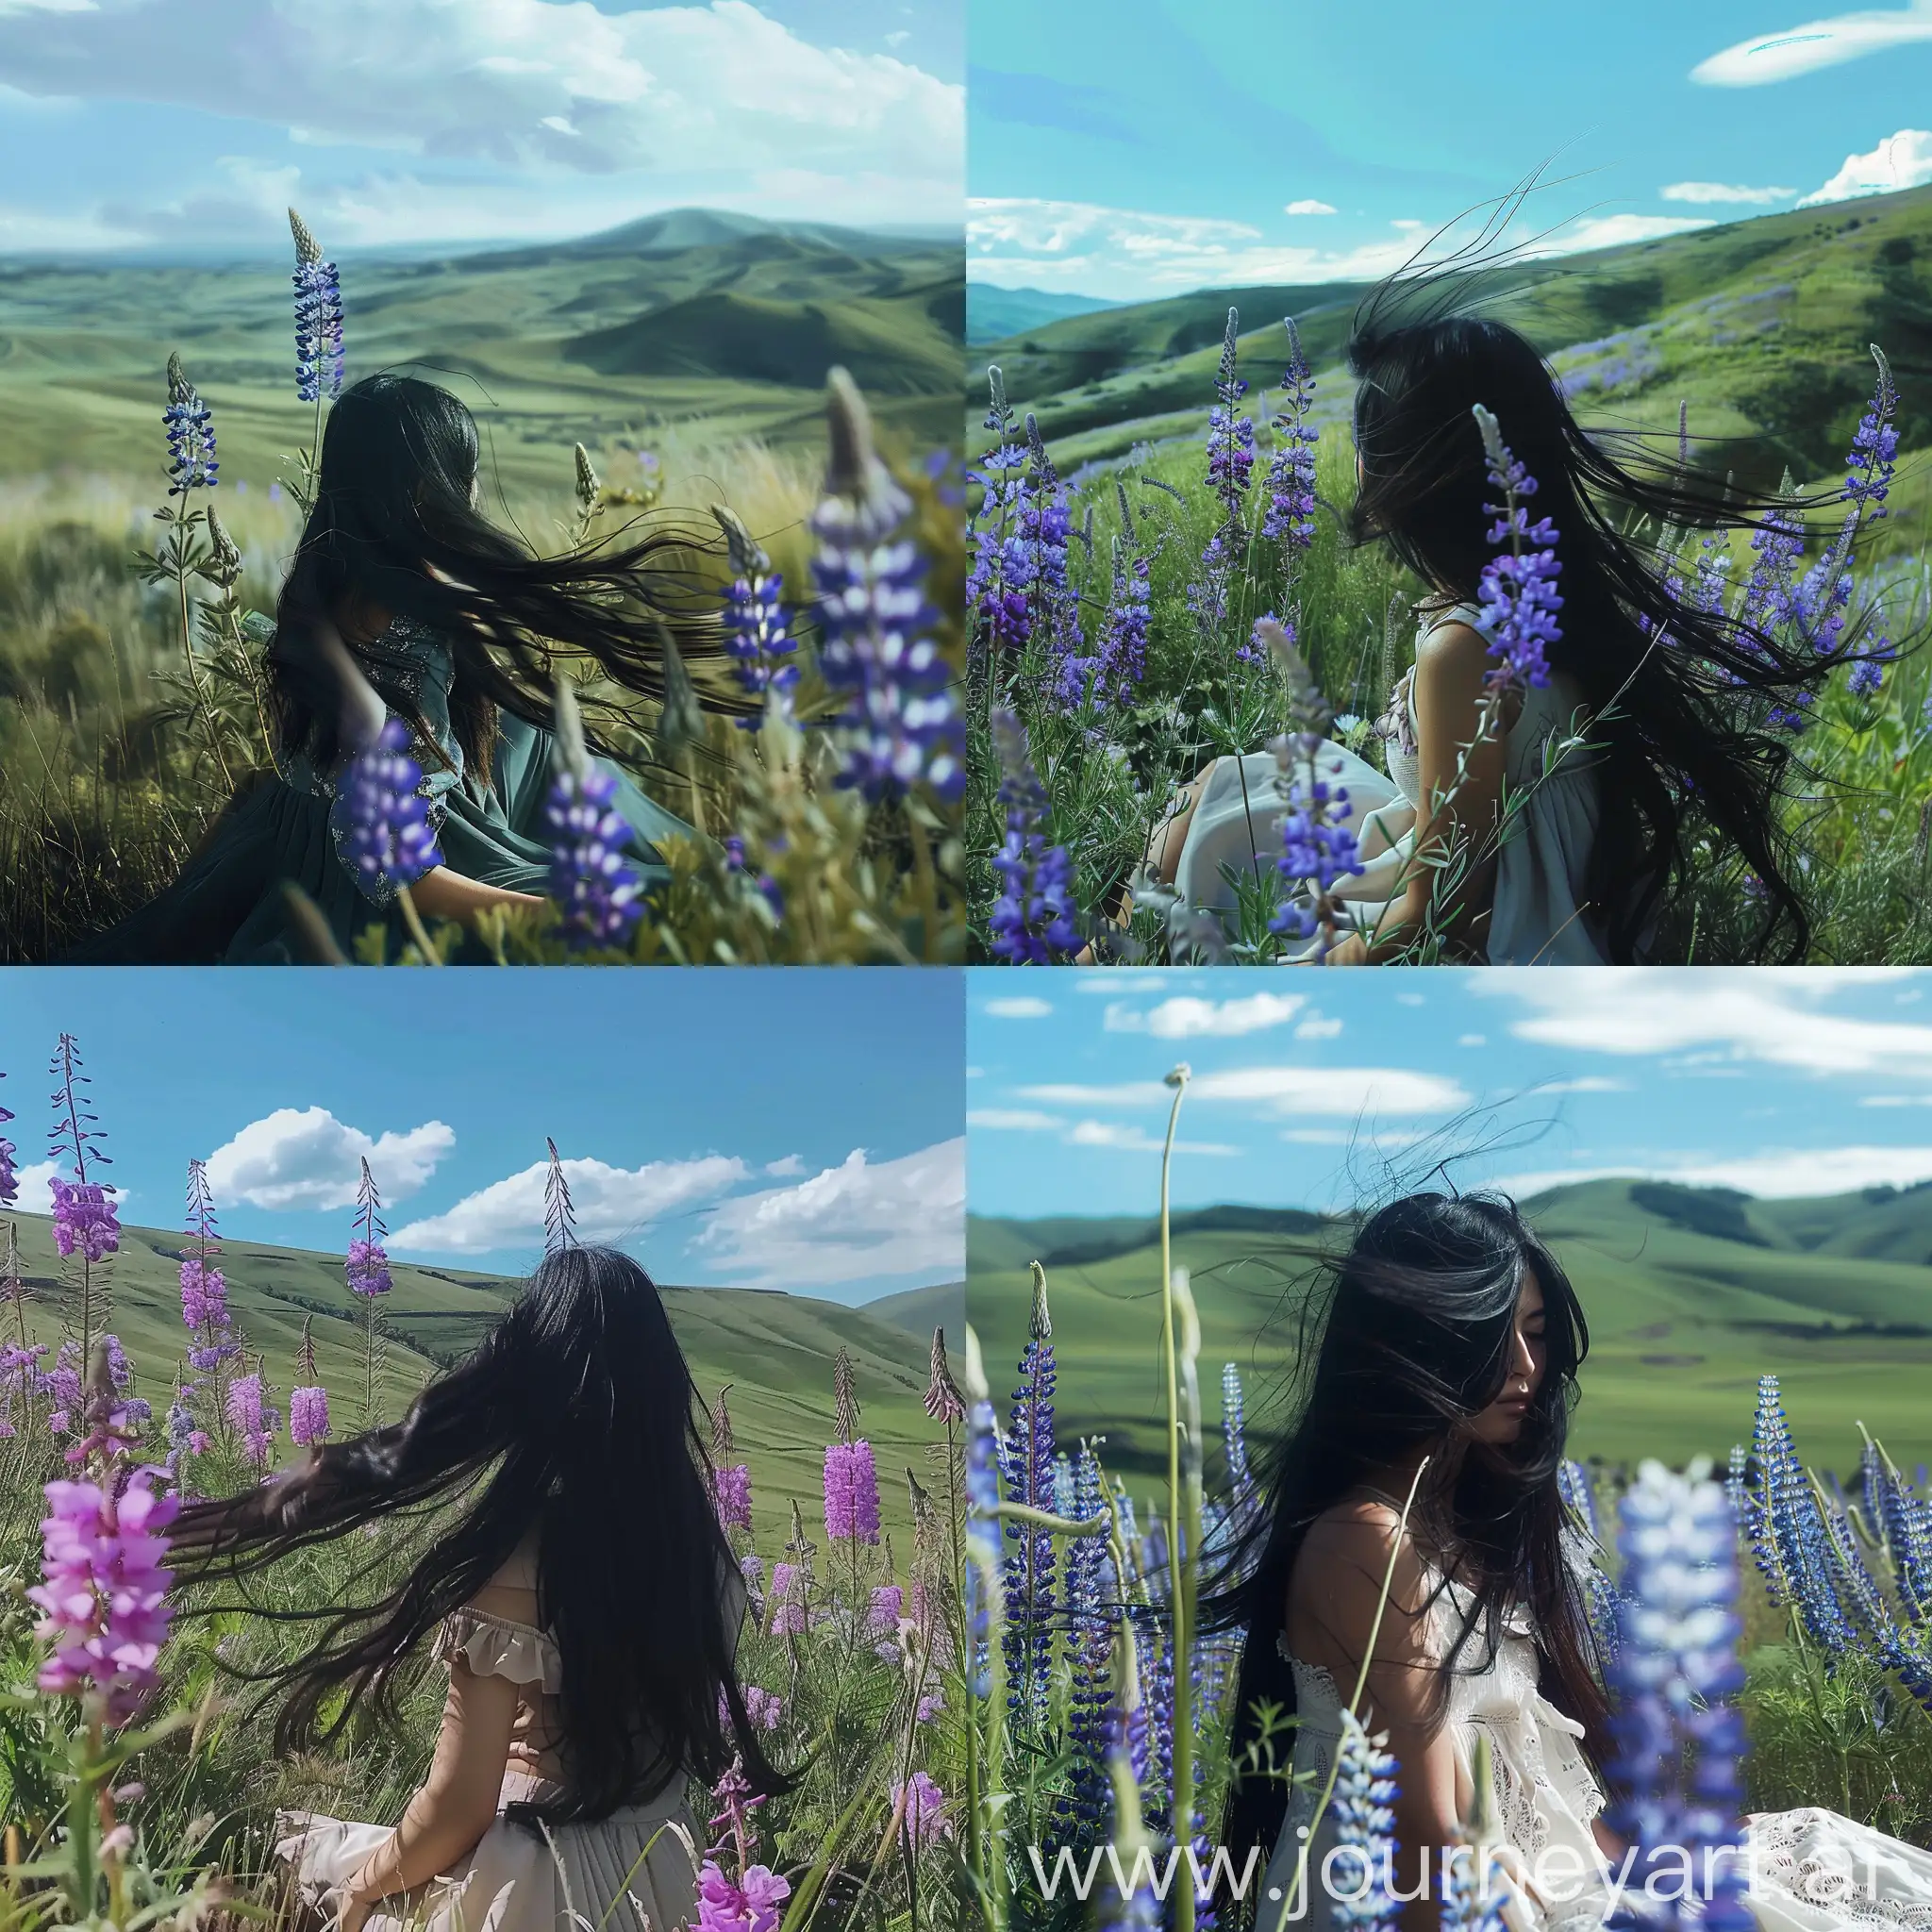 Aesthetic instagram post realistic, girl with long black hair blown by the wind sitting among tall purple flowers, green hills and blue sky in background